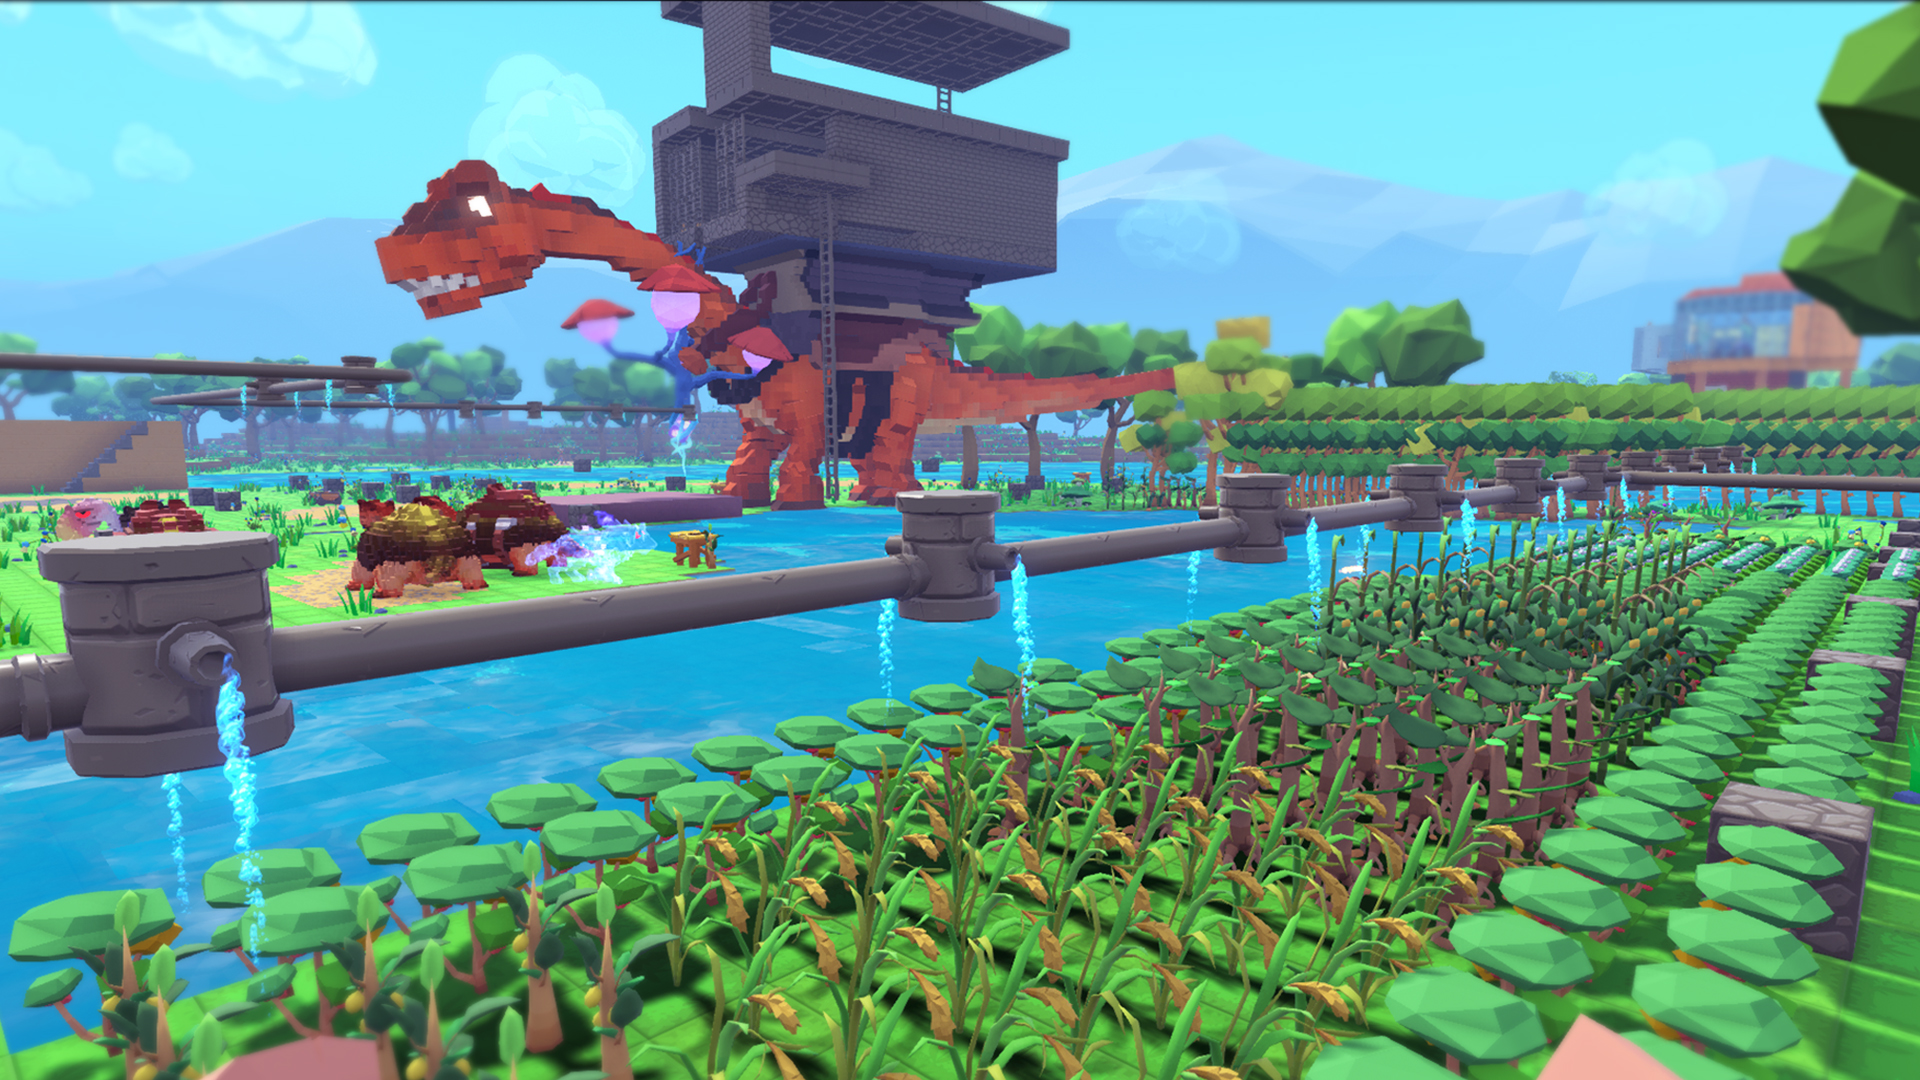 PixARK is Heading to Steam in March